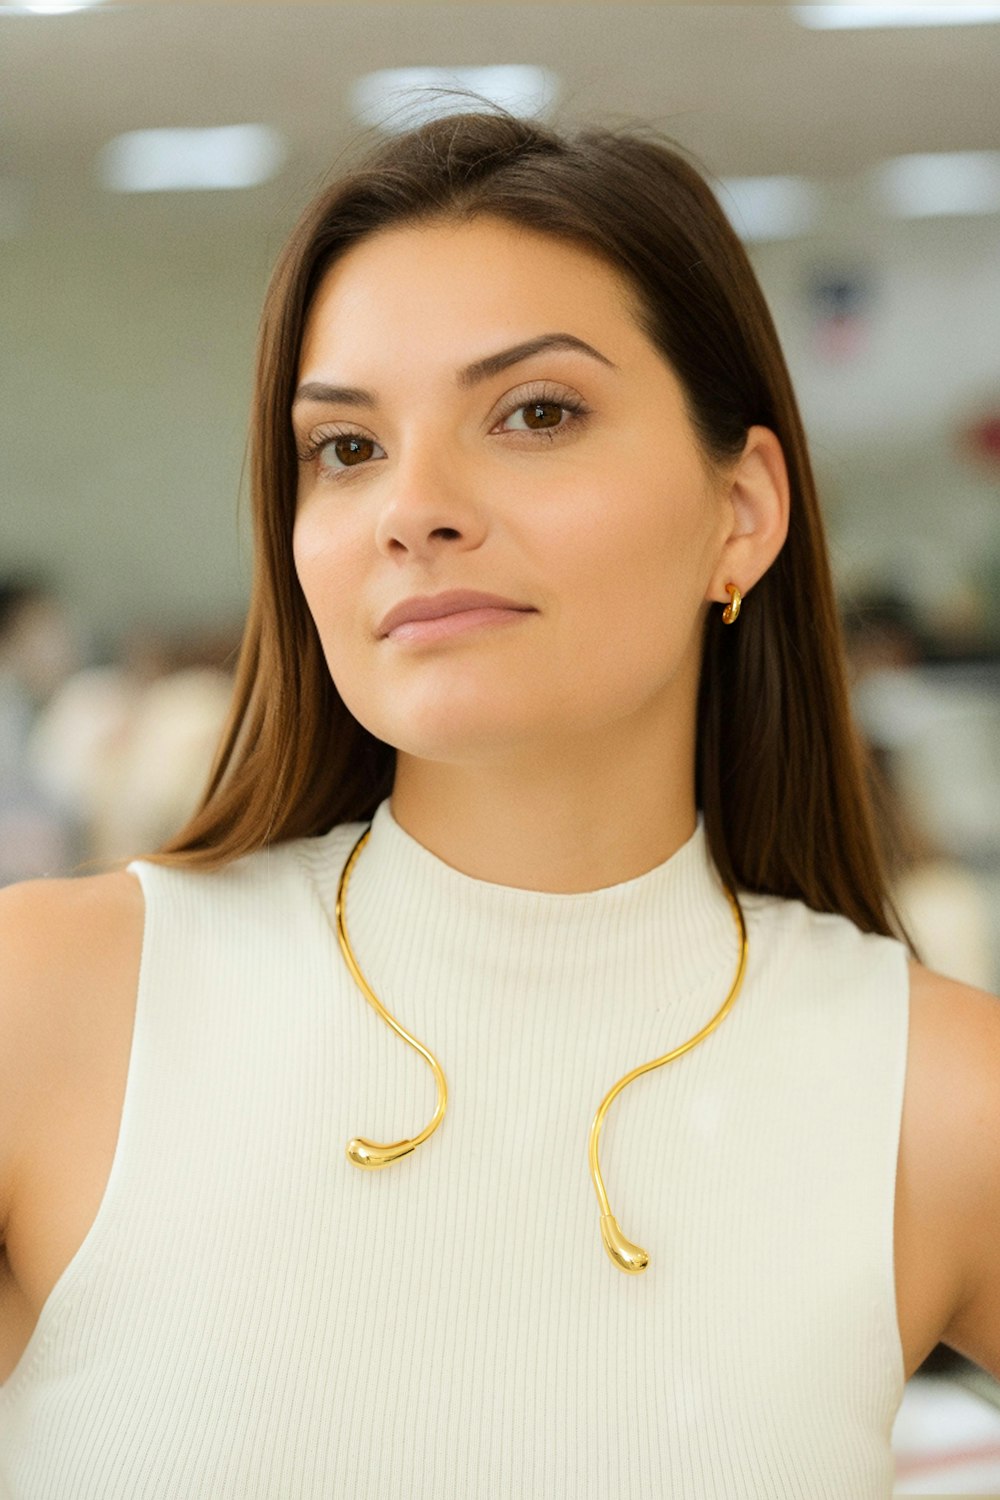 a woman wearing a white top and a gold necklace